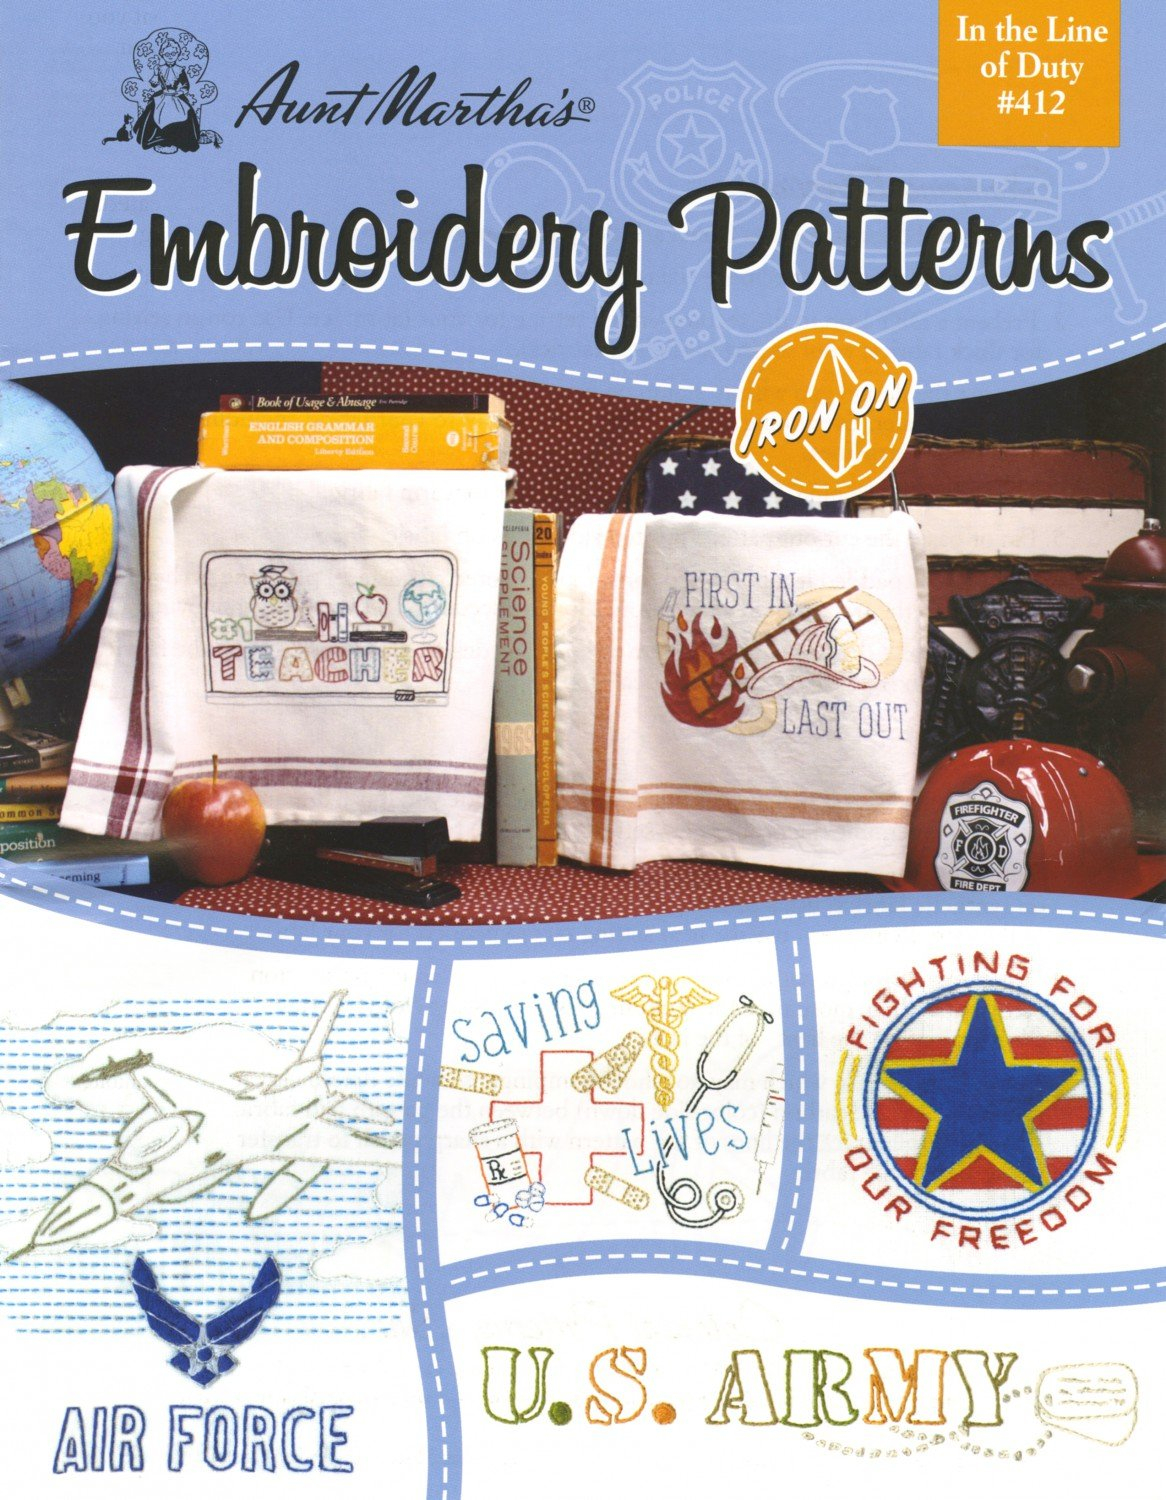 Aunt Martha Embroidery Patterns Aunt Marthas Embroidery Pattern In The Line Of Duty 043272004123